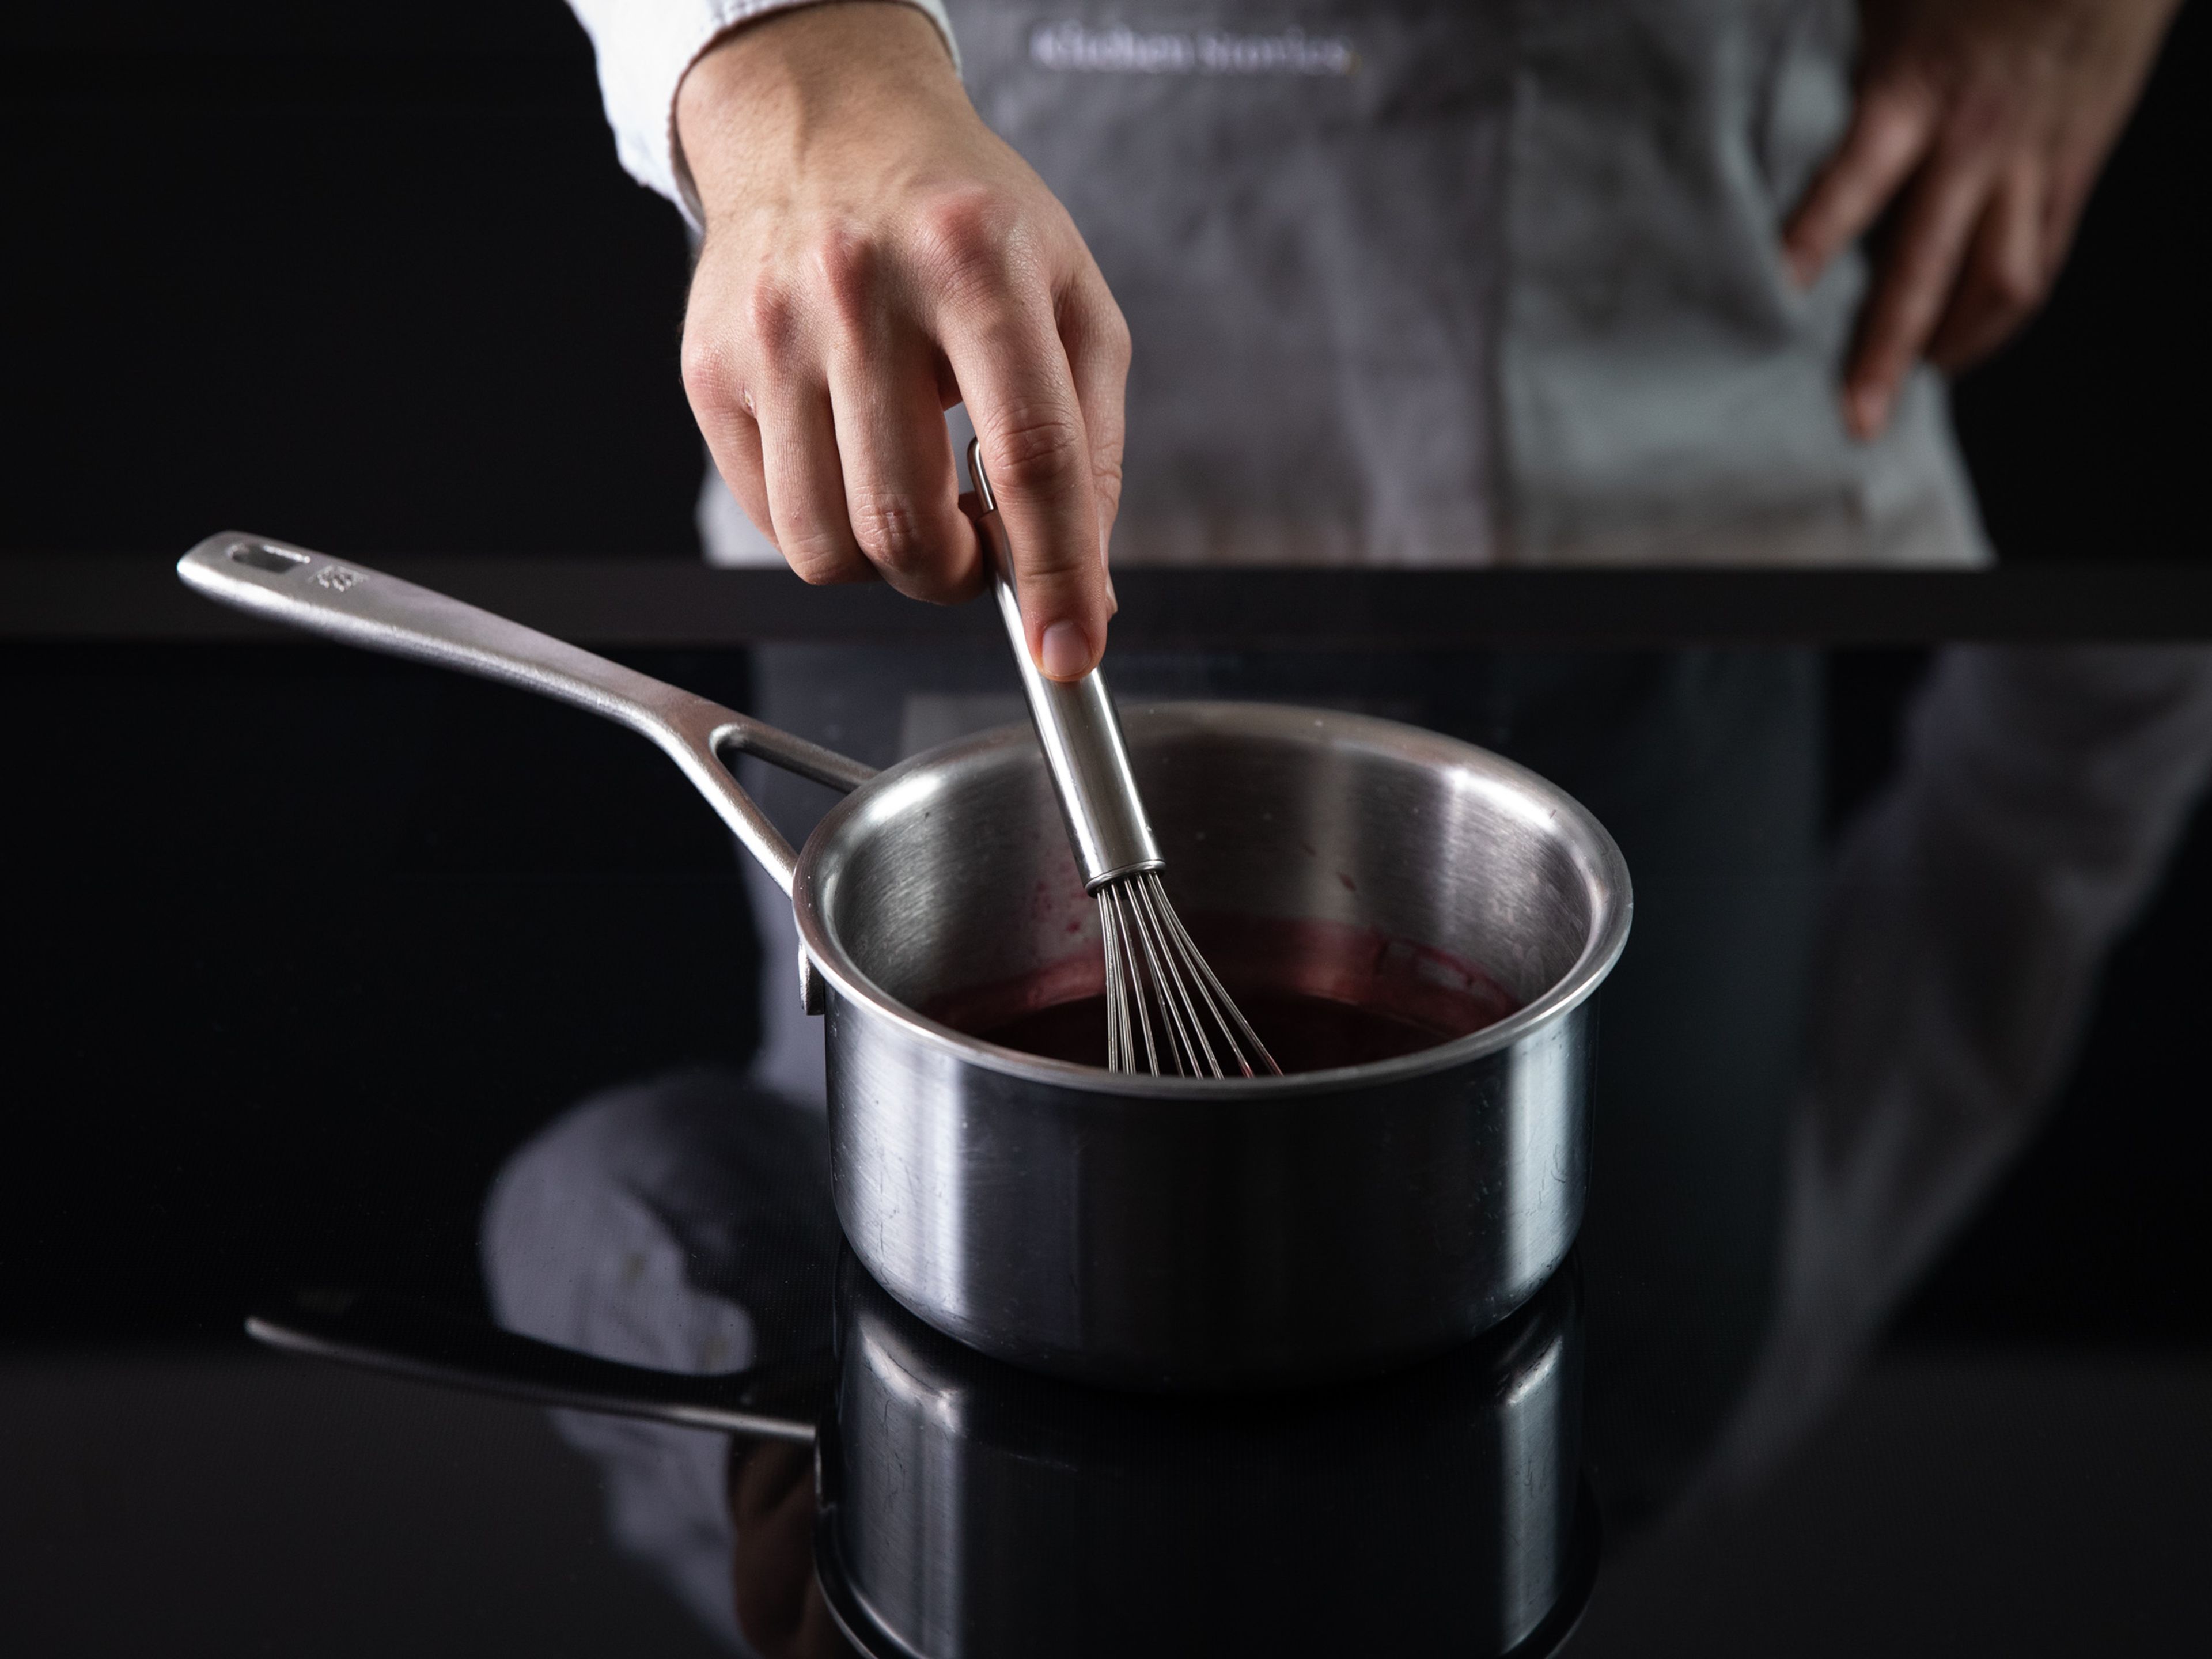 Heat a saucepan over medium-high heat and add some sugar. Let caramelize. Add liquid from jarred sour cherries. Dissolve starch in water, then slowly whisk in to the saucepan. Once thickened, add sour cherries.